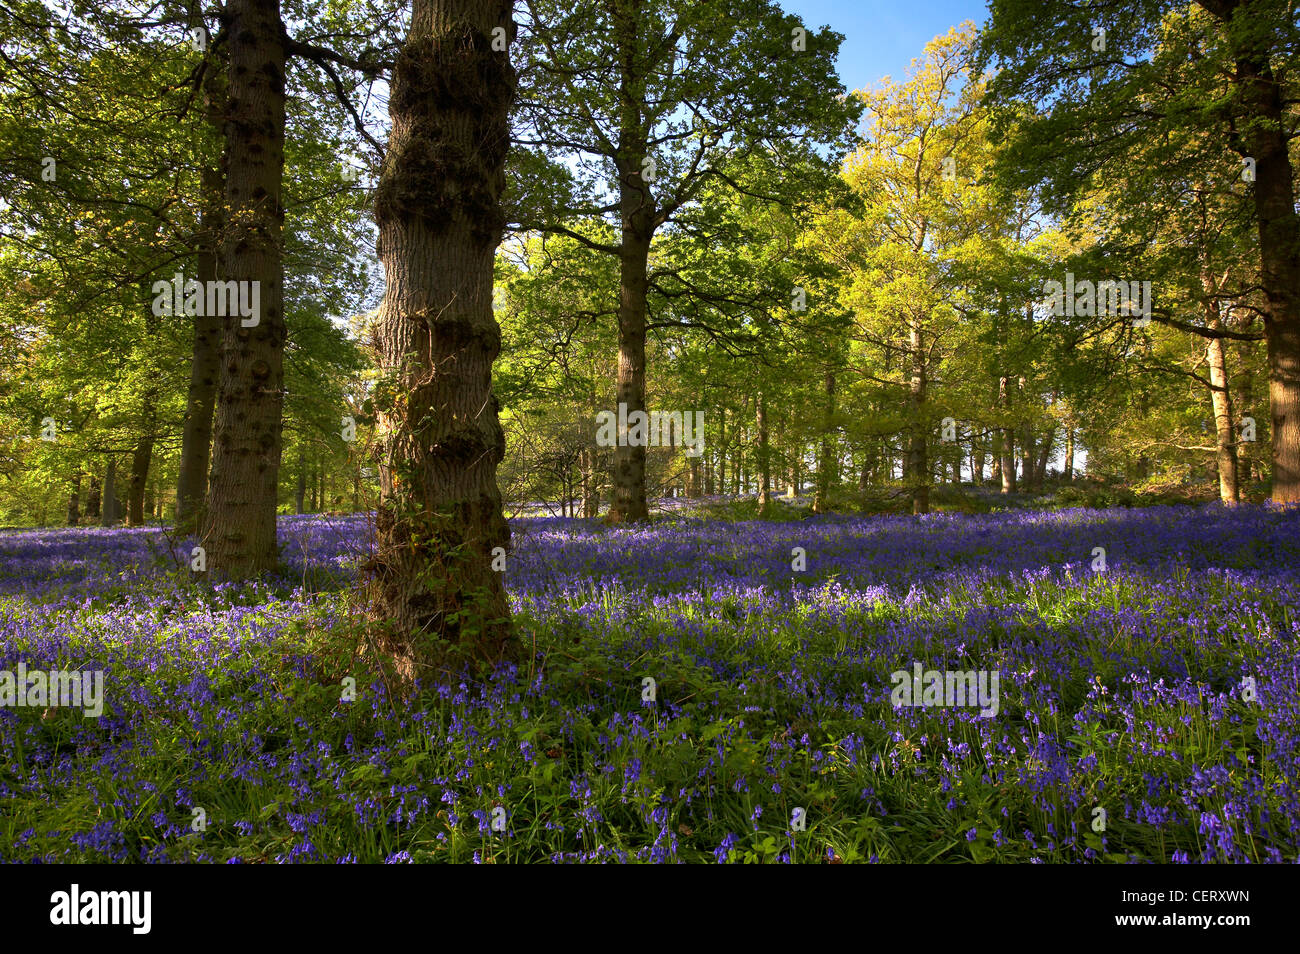 Woodland with a carpet of bluebells. Stock Photo